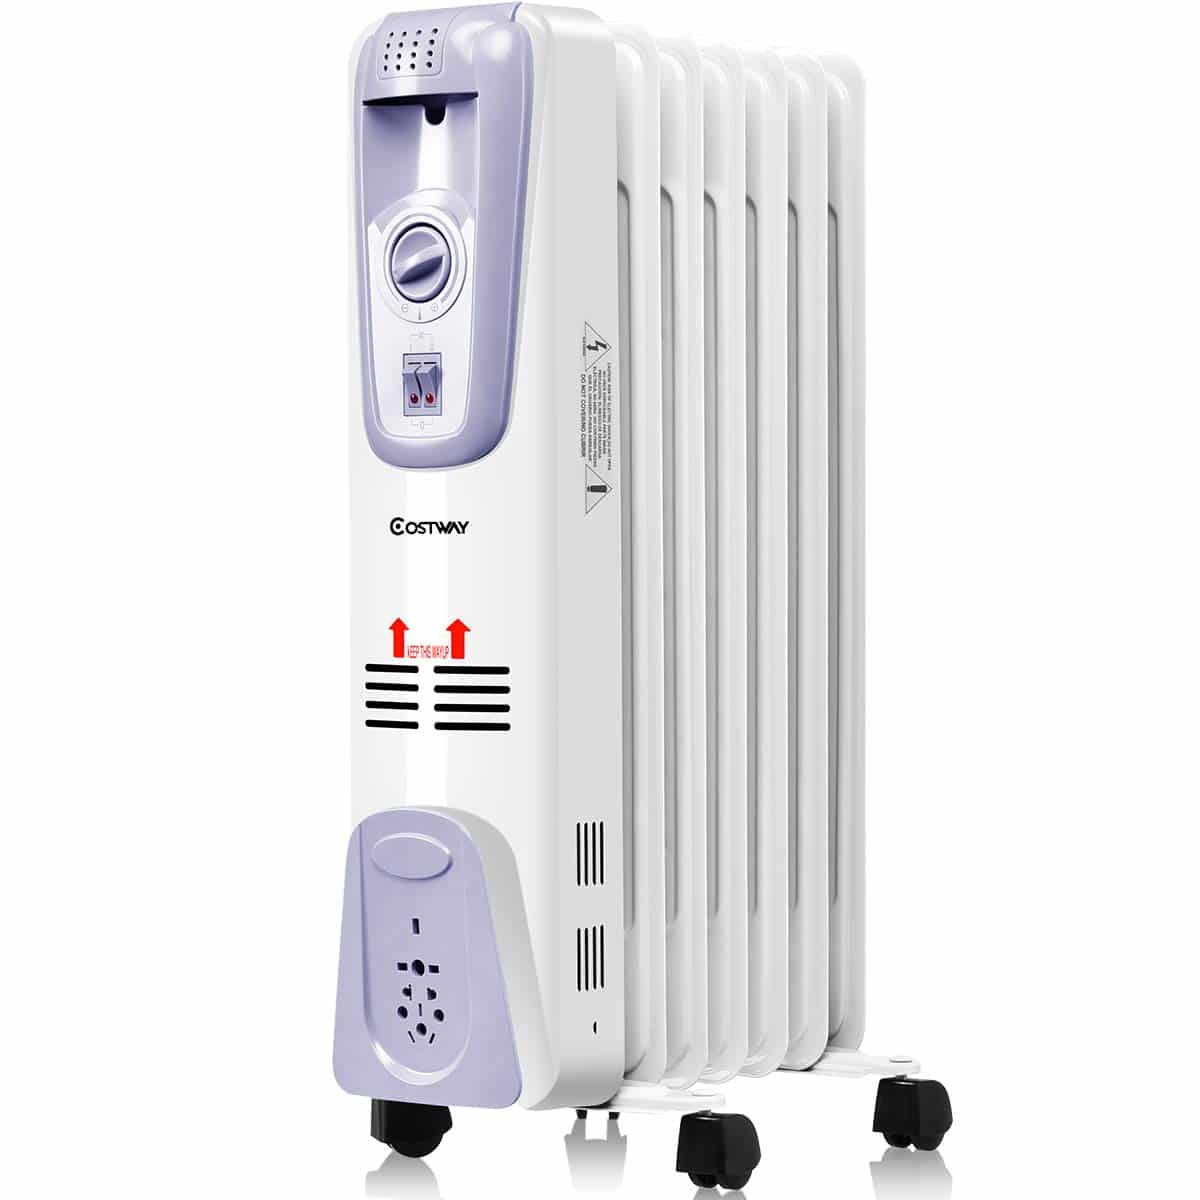 COSTWAY 1500 W 7-Fin Electric Oil Filled Space Thermostat Heater